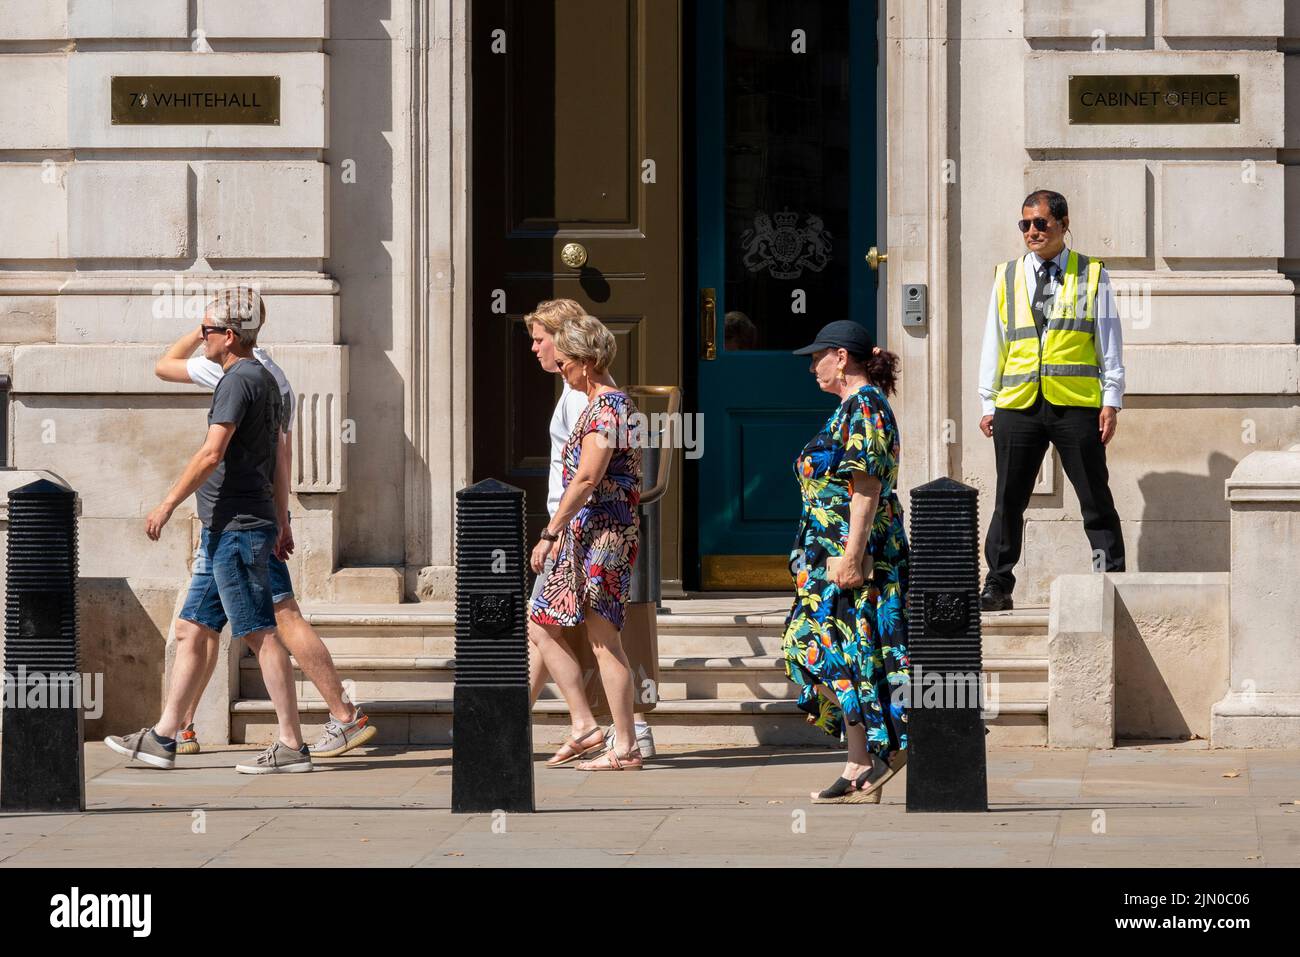 Whitehall, Westminster, London, UK. 8th Aug, 2022. The hot weather has continued in the City. People walk past the Cabinet Office in Whitehall, Westminster Stock Photo